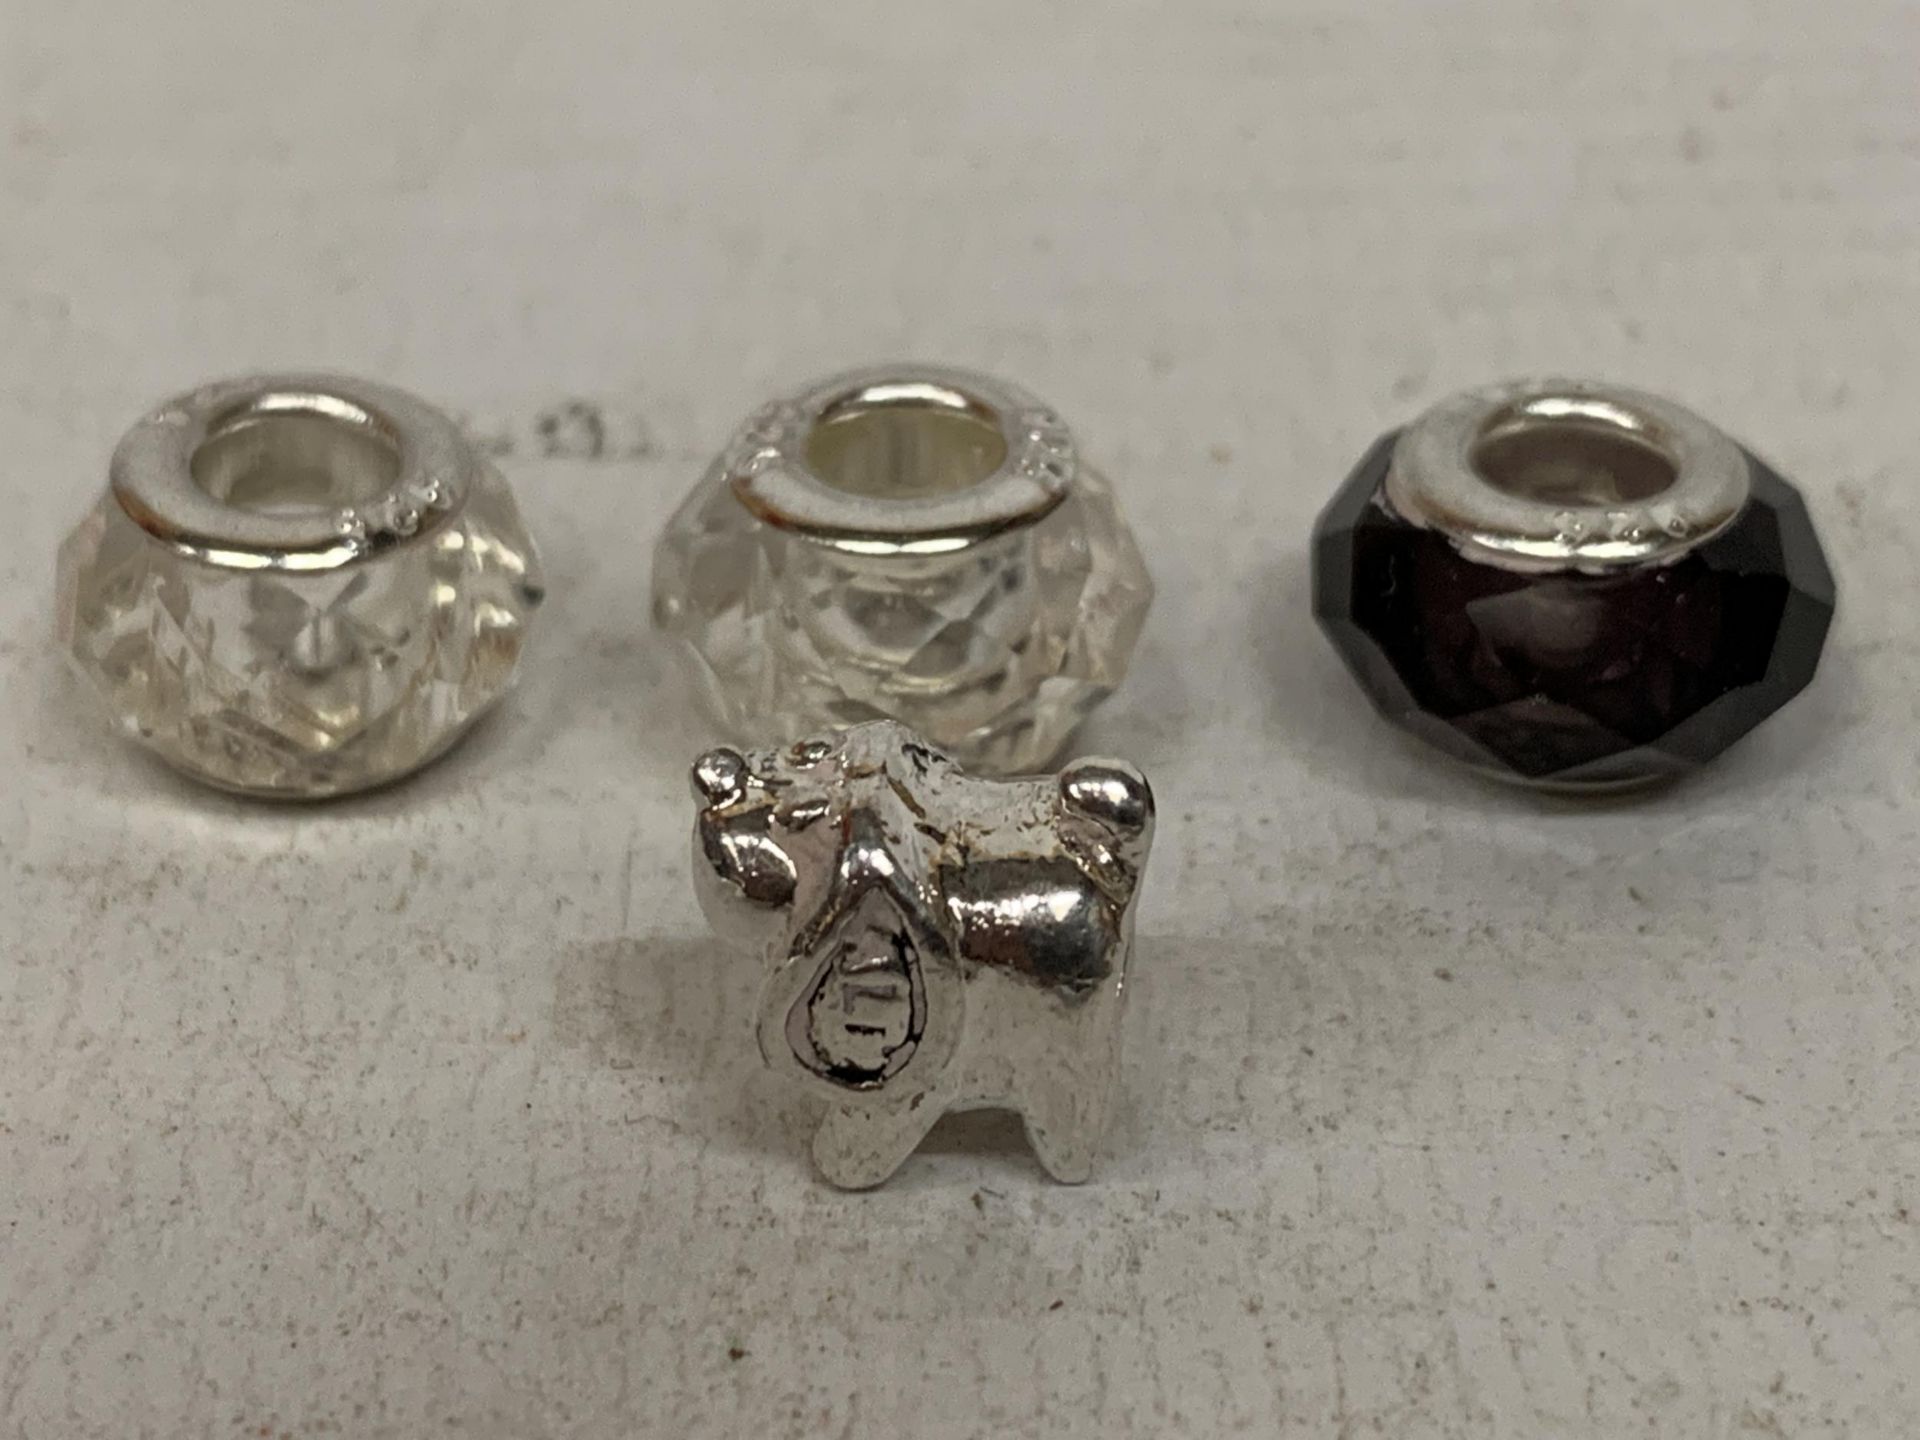 FIFTEEN PANDORA STYLE BEADS WITH 925 SILVER INNER - Image 4 of 5